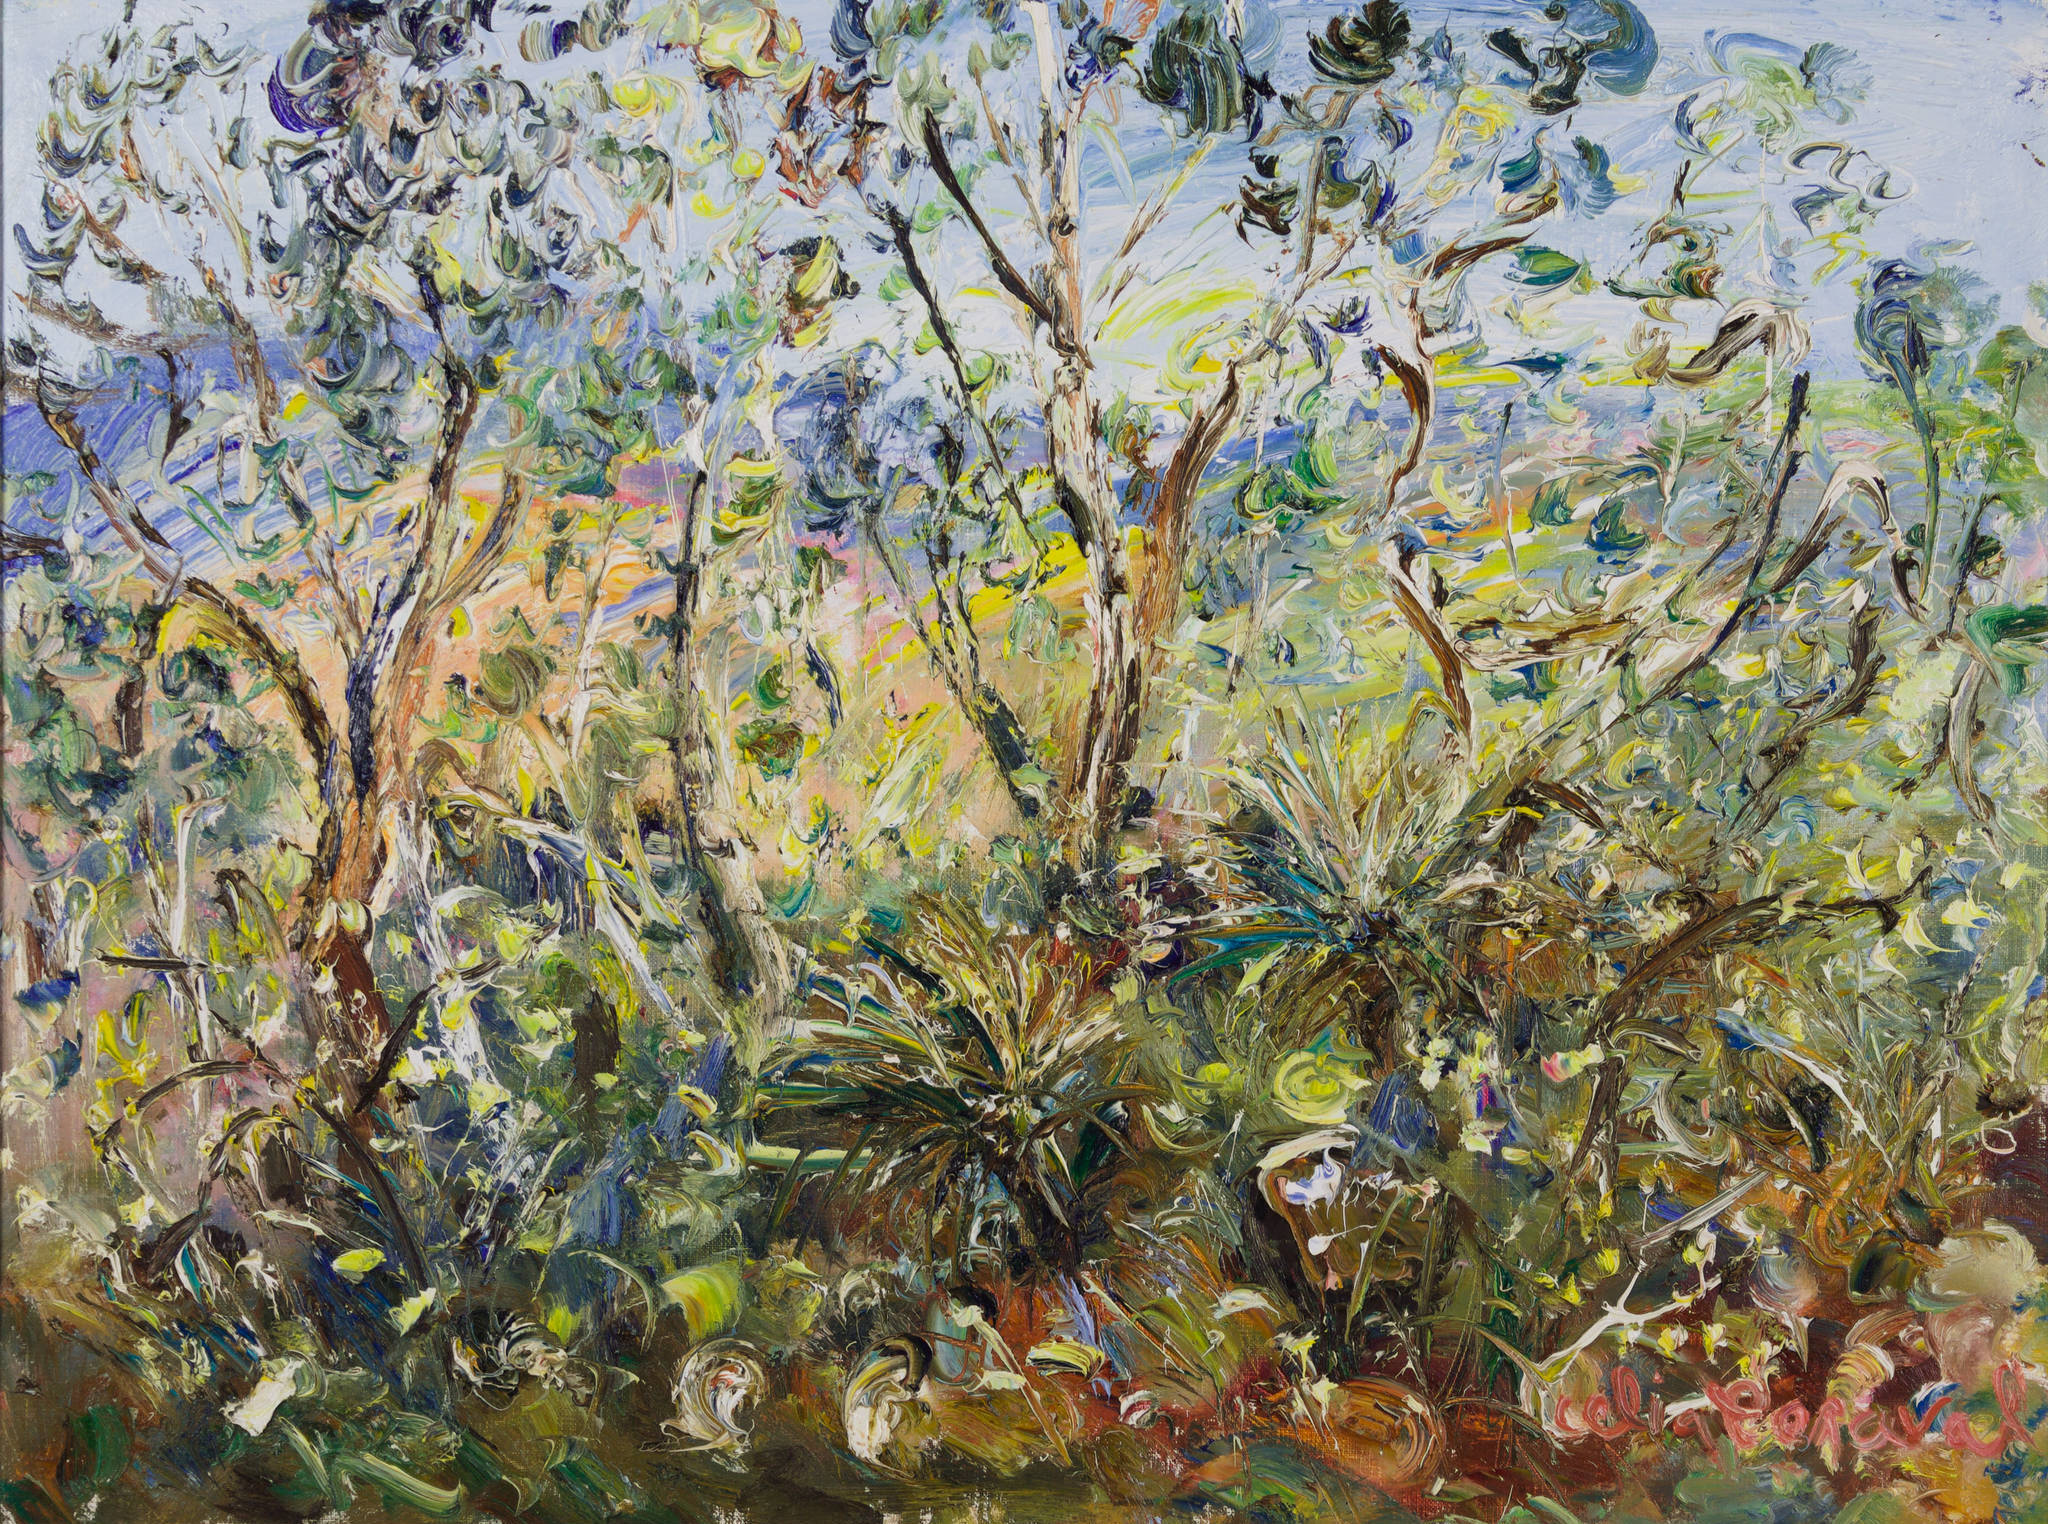 Celia Perceval 'Grass Trees and Wattle in the Sunlight'